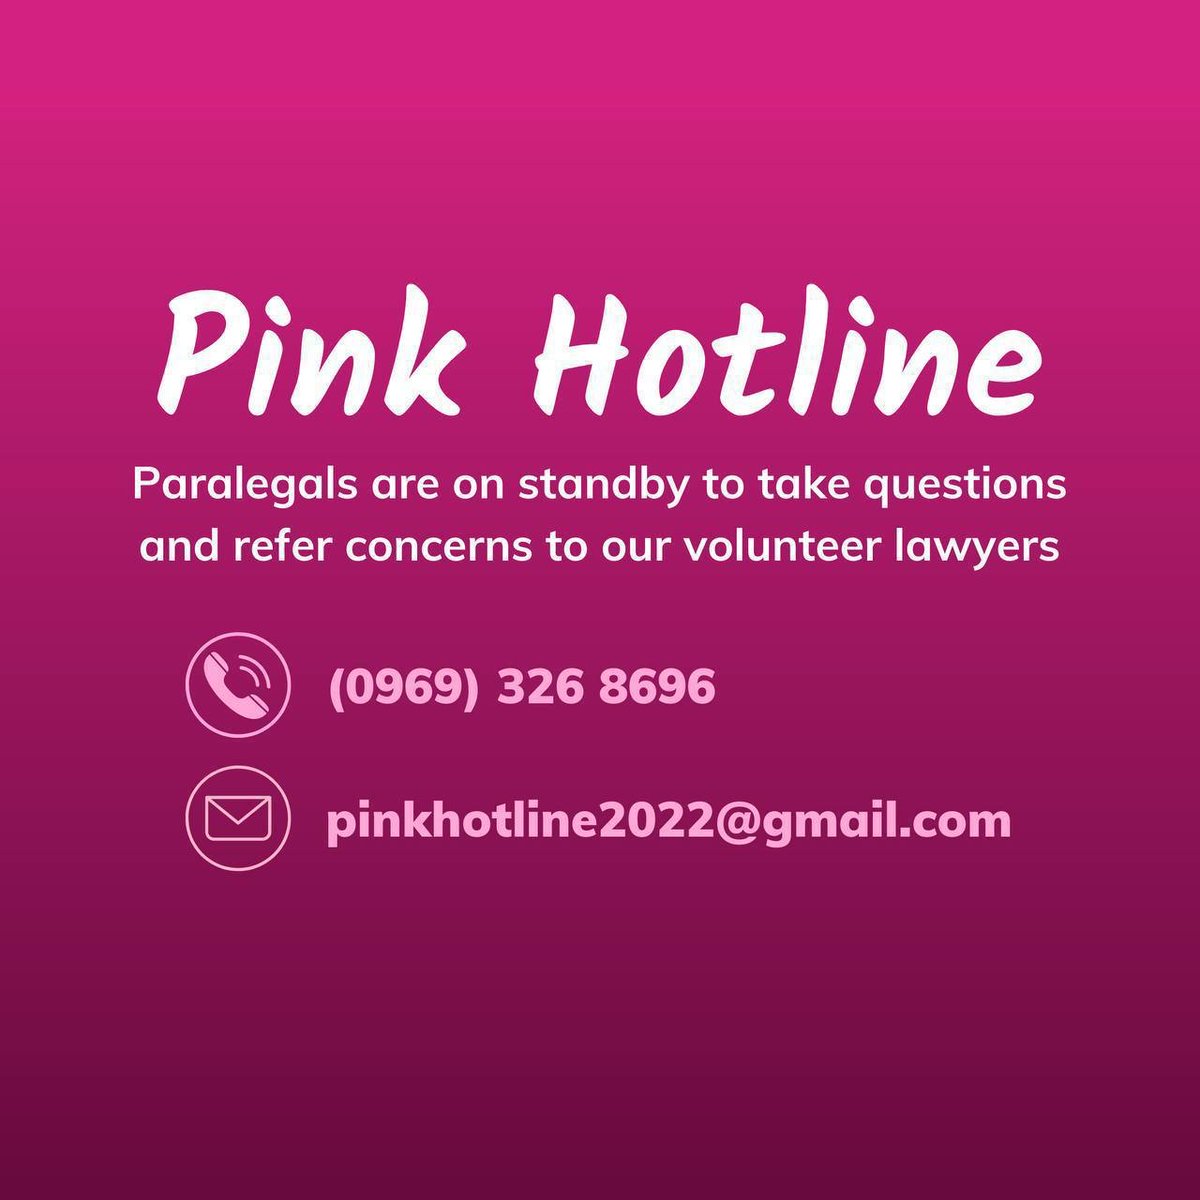 Paralegals are on standby to take questions and refer concerns to our volunteer lawyers. PLEASE CONTACT THE FOLLOWING: CALL/TEXT HOTLINE: 09693268696 EMAIL: pinkhotline2022@gmail.com GO OUT AND VOTE! #Halalan2022 #Eleksyon2022 #VoteSAFEPilipinas http:pinkhotline2022@gmail.com